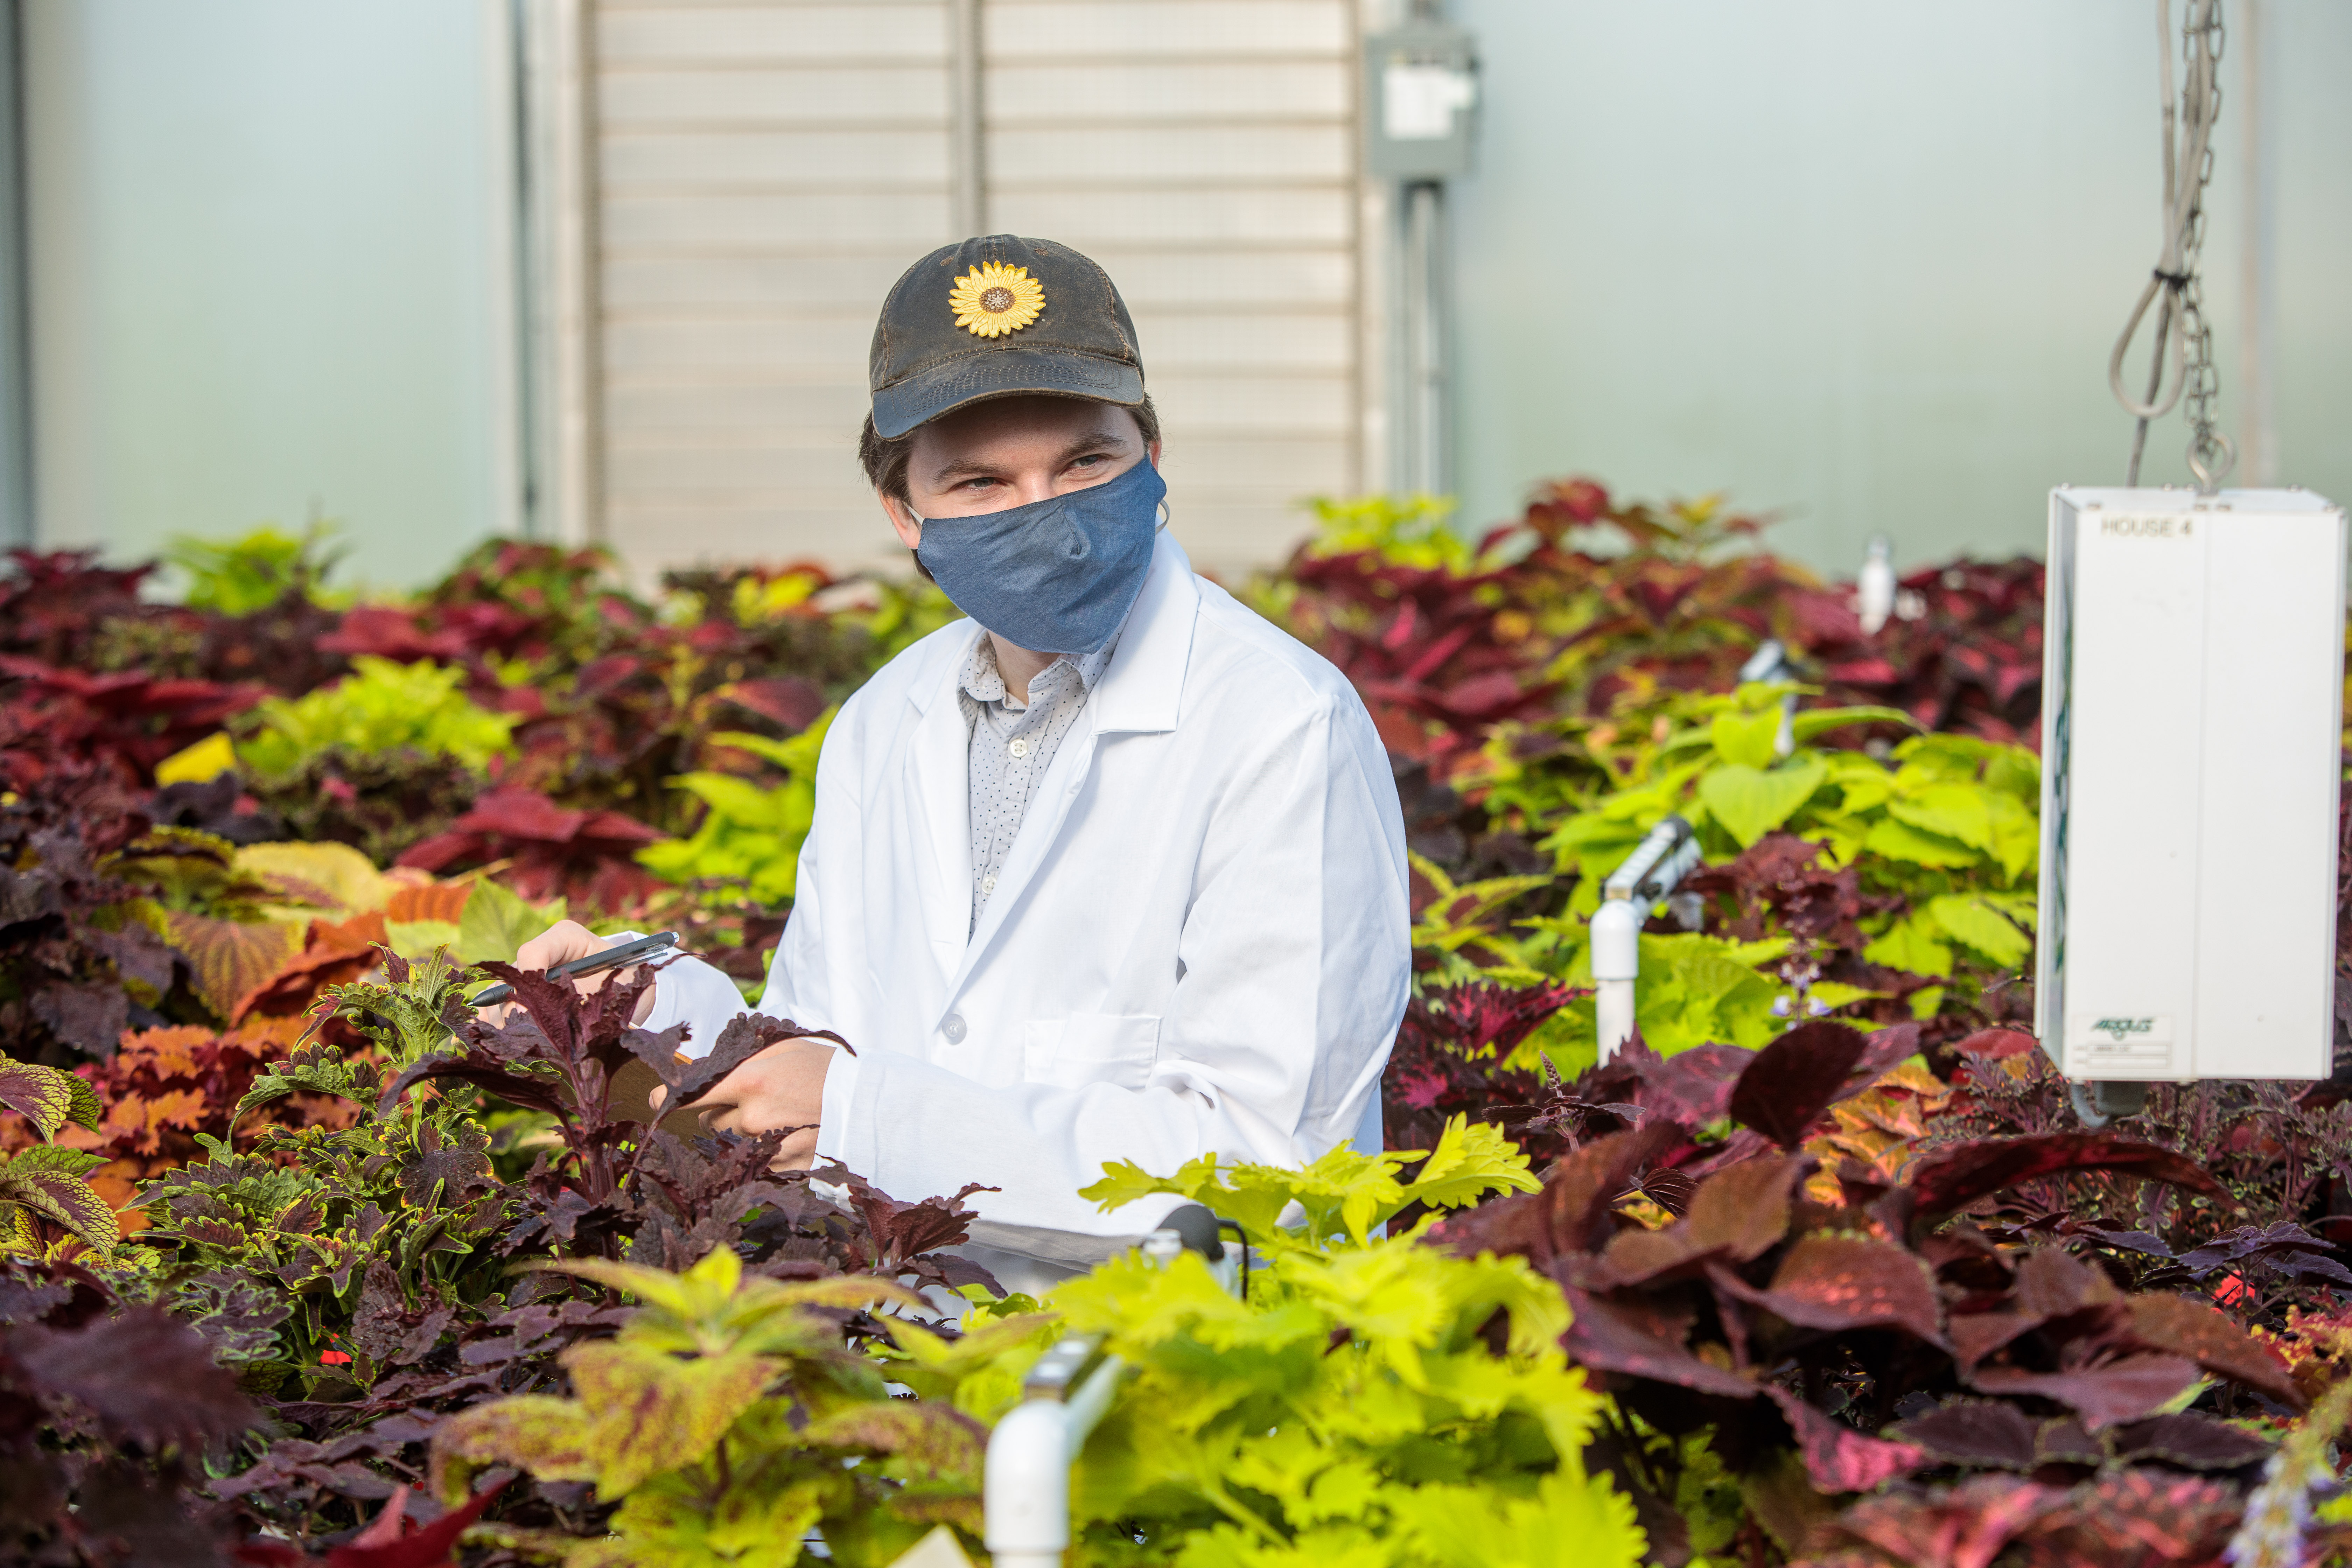 Undergraduate student Ty Rich leads a coleus cultivar trial at the University of Kentucky. Photo by Matt Barton